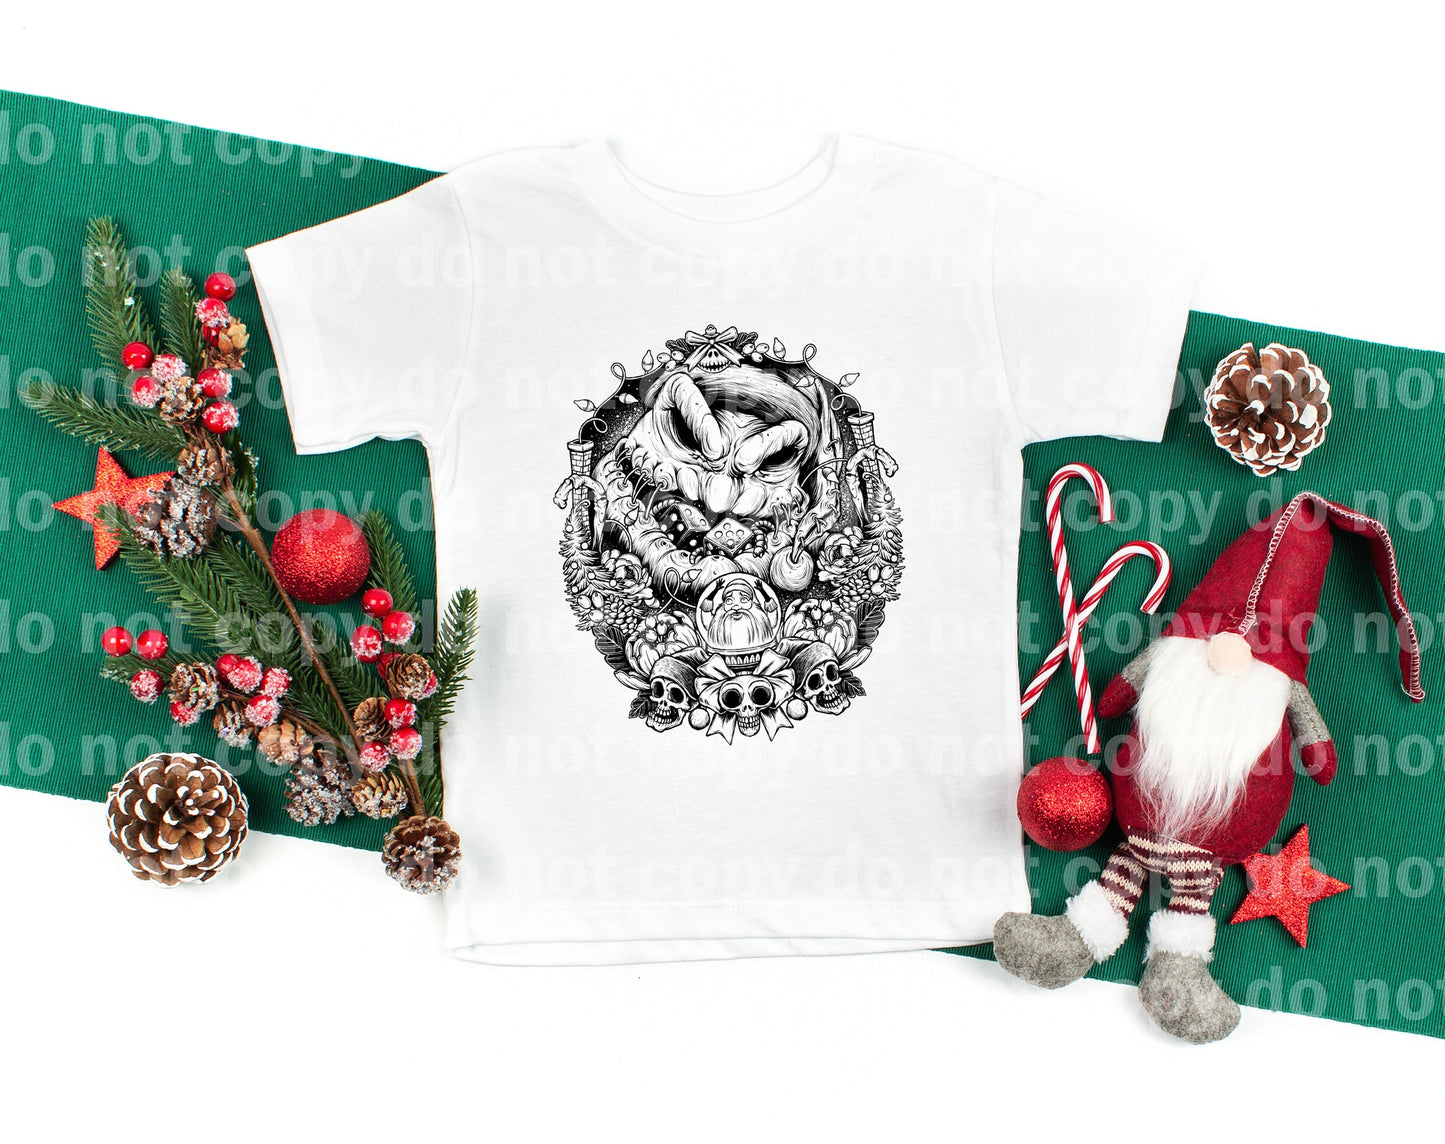 Boogie Christmas Full Color/One Color Dream Print or Sublimation Print